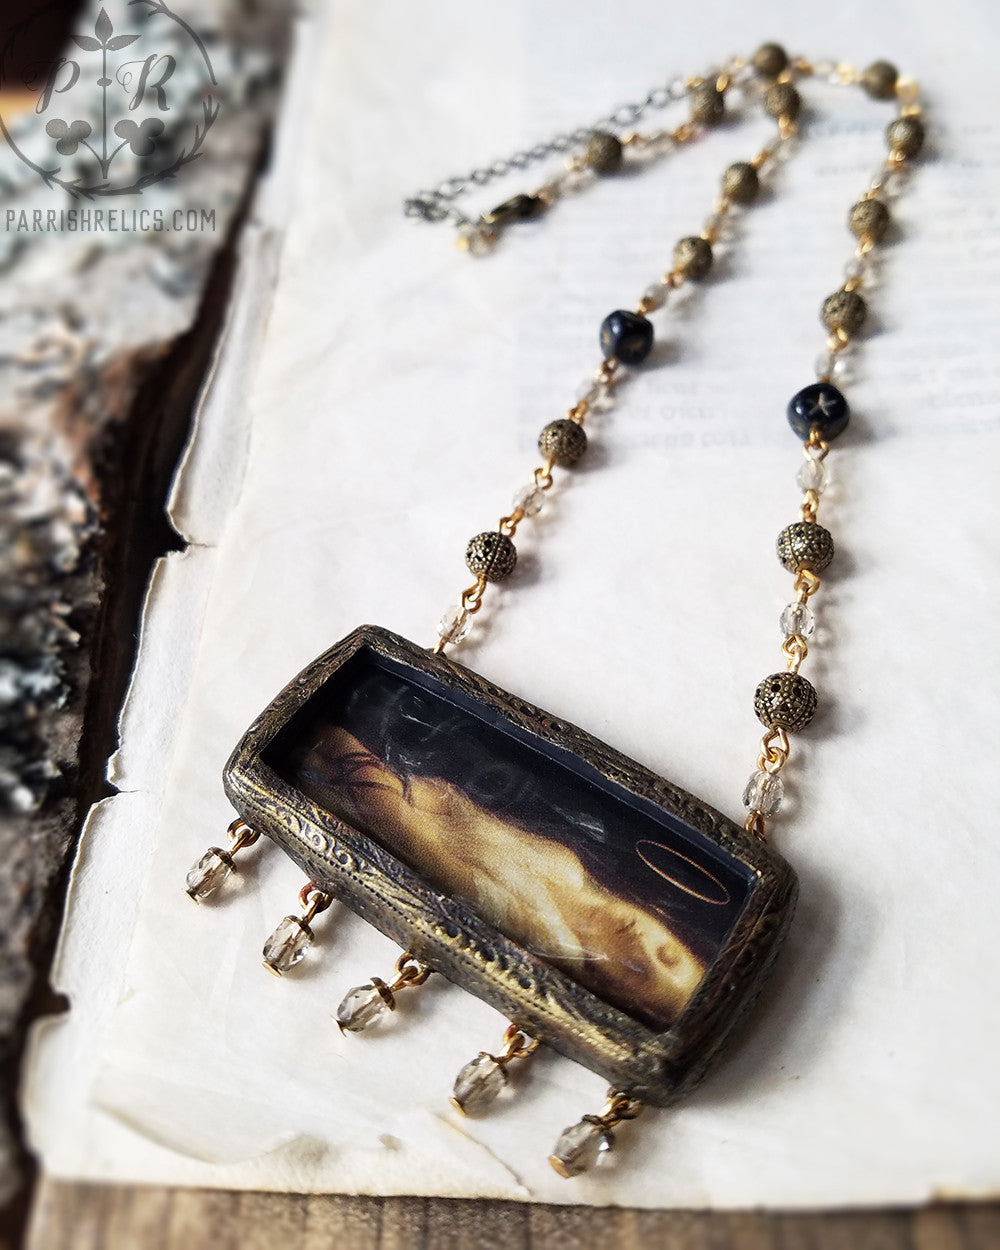 The Young Martyr ~ Pictorial Shrine Amulet